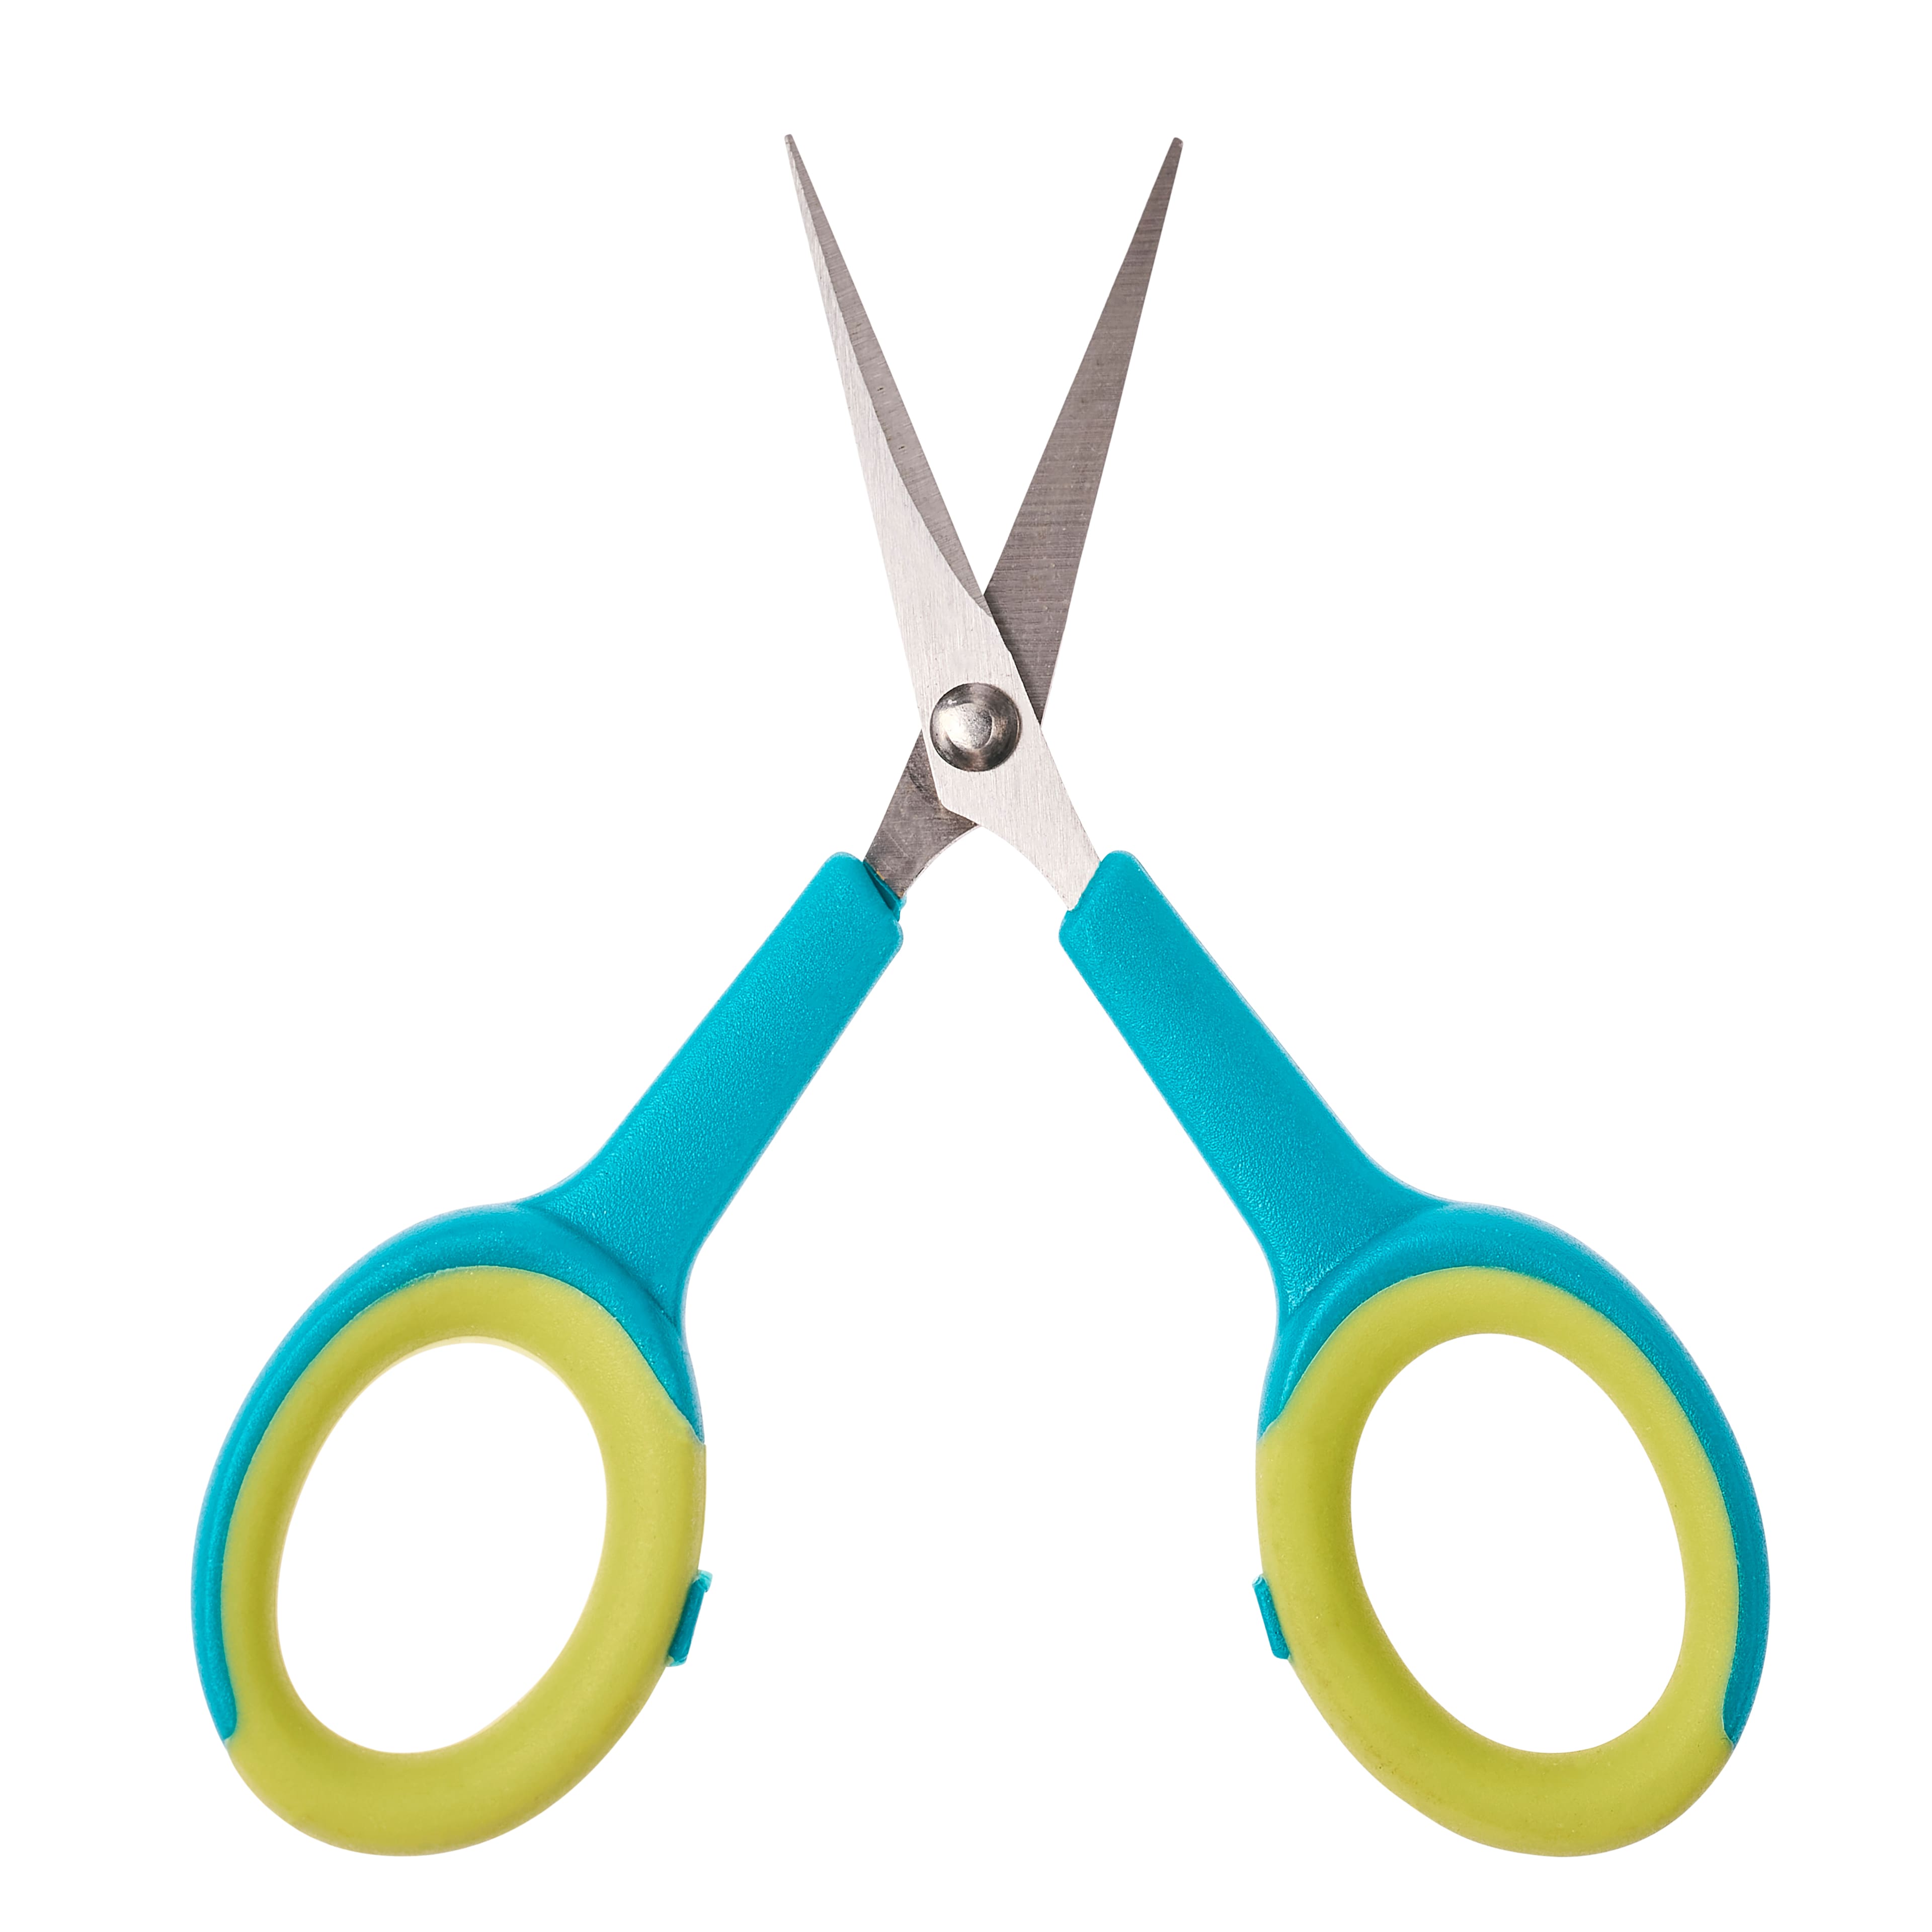 16 Pack: Embroidery Scissors by Loops &#x26; Threads&#x2122;